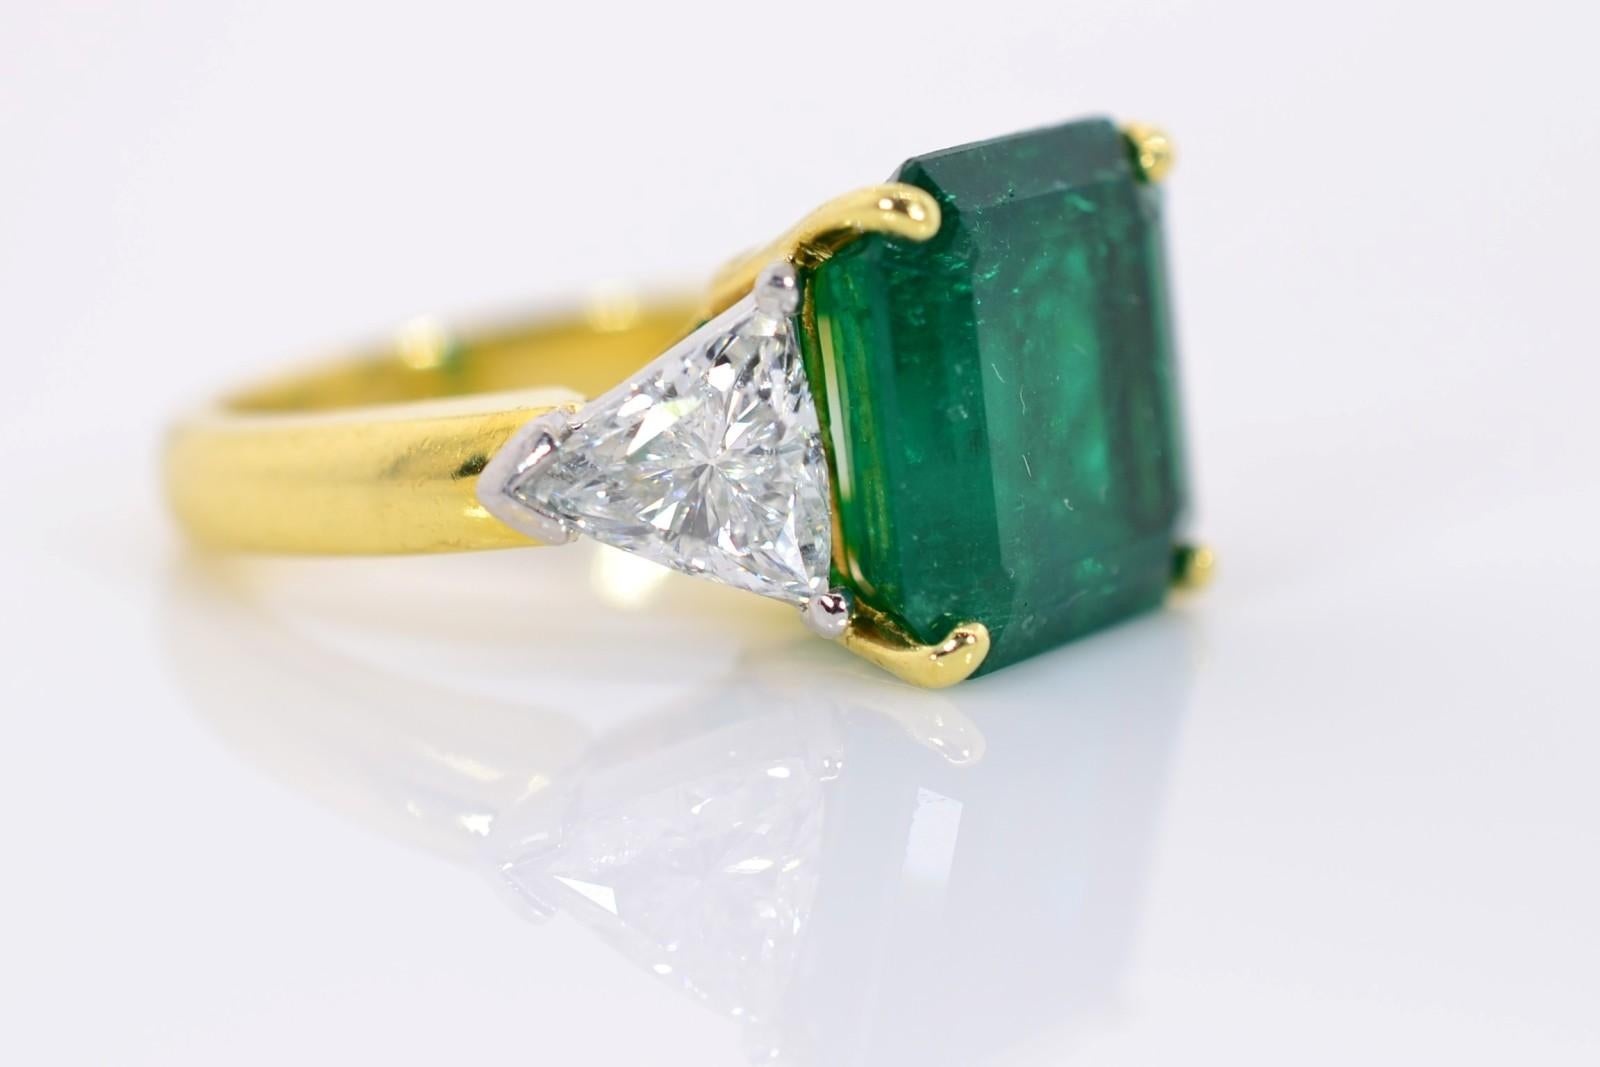 An Emerald ring--always classic and desirable!  This ring is a beautiful example, a 6.03 carat deep green Emerald certified by A.G.L.  Report No. 1105190 of Colombian origin and with minor enhancement.   The Emerald is flanked by two Trillion cut